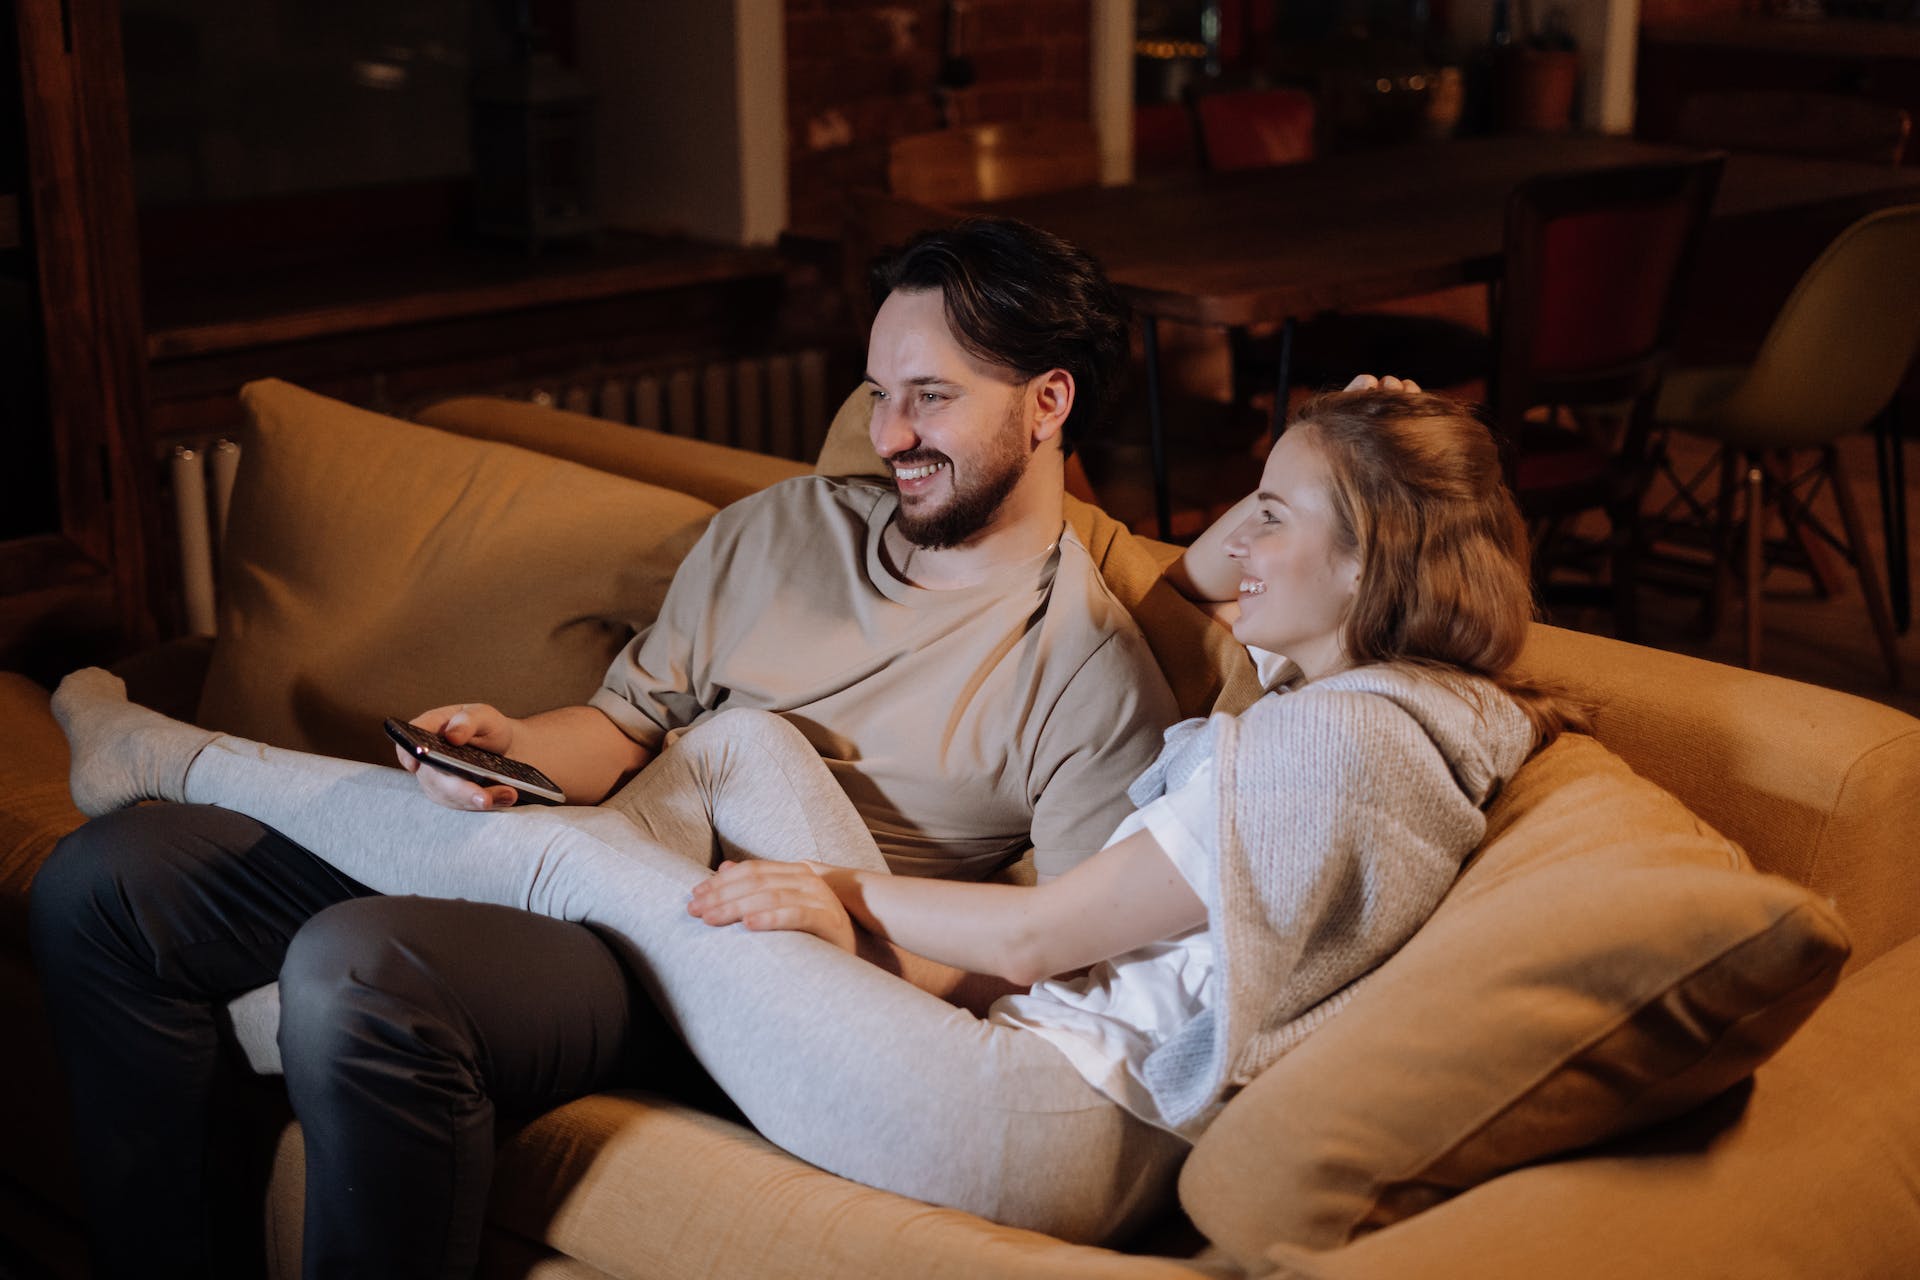 A couple relaxing at home | Source: Pexels